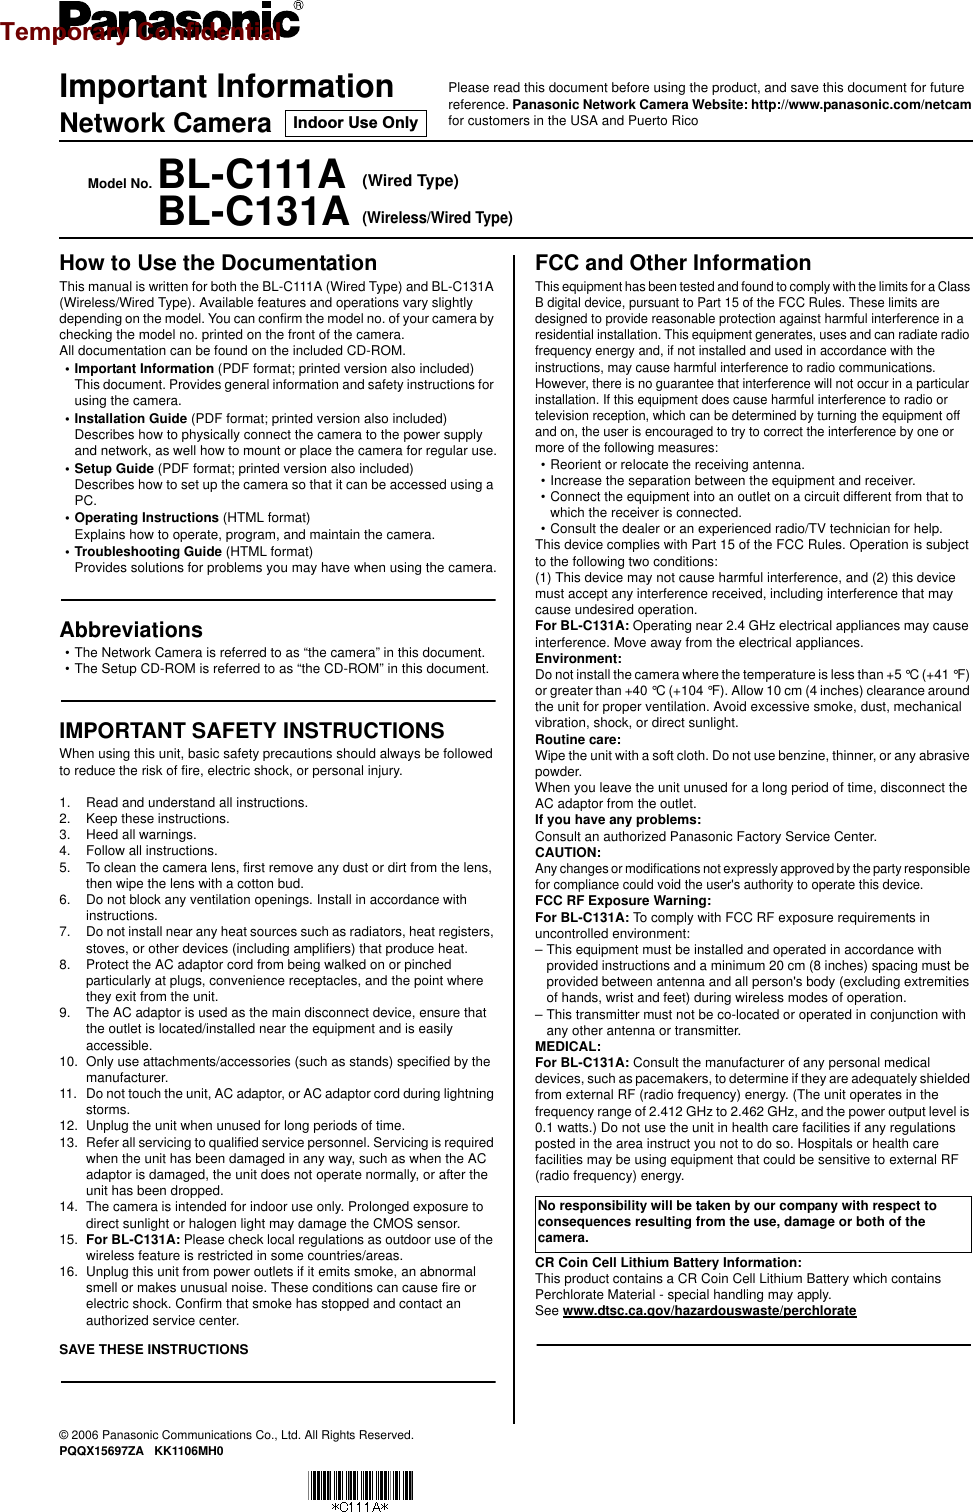 Important InformationNetwork CameraModel No. BL-C111A (Wired Type)BL-C131A(Wireless/Wired Type)© 2006 Panasonic Communications Co., Ltd. All Rights Reserved.PQQX15697ZA   KK1106MH0How to Use the DocumentationThis manual is written for both the BL-C111A (Wired Type) and BL-C131A (Wireless/Wired Type). Available features and operations vary slightly depending on the model. You can confirm the model no. of your camera by checking the model no. printed on the front of the camera.All documentation can be found on the included CD-ROM.• Important Information (PDF format; printed version also included)This document. Provides general information and safety instructions for using the camera.• Installation Guide (PDF format; printed version also included)Describes how to physically connect the camera to the power supply and network, as well how to mount or place the camera for regular use.• Setup Guide (PDF format; printed version also included)Describes how to set up the camera so that it can be accessed using a PC.• Operating Instructions (HTML format)Explains how to operate, program, and maintain the camera.• Troubleshooting Guide (HTML format)Provides solutions for problems you may have when using the camera.Abbreviations• The Network Camera is referred to as “the camera” in this document.• The Setup CD-ROM is referred to as “the CD-ROM” in this document.IMPORTANT SAFETY INSTRUCTIONSWhen using this unit, basic safety precautions should always be followed to reduce the risk of fire, electric shock, or personal injury.1. Read and understand all instructions.2. Keep these instructions.3. Heed all warnings.4. Follow all instructions.5. To clean the camera lens, first remove any dust or dirt from the lens, then wipe the lens with a cotton bud.6. Do not block any ventilation openings. Install in accordance with instructions.7. Do not install near any heat sources such as radiators, heat registers, stoves, or other devices (including amplifiers) that produce heat.8. Protect the AC adaptor cord from being walked on or pinched particularly at plugs, convenience receptacles, and the point where they exit from the unit.9. The AC adaptor is used as the main disconnect device, ensure that the outlet is located/installed near the equipment and is easily accessible.10. Only use attachments/accessories (such as stands) specified by the manufacturer.11. Do not touch the unit, AC adaptor, or AC adaptor cord during lightning storms.12. Unplug the unit when unused for long periods of time.13. Refer all servicing to qualified service personnel. Servicing is required when the unit has been damaged in any way, such as when the AC adaptor is damaged, the unit does not operate normally, or after the unit has been dropped.14. The camera is intended for indoor use only. Prolonged exposure to direct sunlight or halogen light may damage the CMOS sensor.15. For BL-C131A: Please check local regulations as outdoor use of the wireless feature is restricted in some countries/areas.16. Unplug this unit from power outlets if it emits smoke, an abnormal smell or makes unusual noise. These conditions can cause fire or electric shock. Confirm that smoke has stopped and contact an authorized service center.SAVE THESE INSTRUCTIONSFCC and Other InformationThis equipment has been tested and found to comply with the limits for a Class B digital device, pursuant to Part 15 of the FCC Rules. These limits are designed to provide reasonable protection against harmful interference in a residential installation. This equipment generates, uses and can radiate radio frequency energy and, if not installed and used in accordance with the instructions, may cause harmful interference to radio communications.However, there is no guarantee that interference will not occur in a particular installation. If this equipment does cause harmful interference to radio or television reception, which can be determined by turning the equipment off and on, the user is encouraged to try to correct the interference by one or more of the following measures:• Reorient or relocate the receiving antenna.• Increase the separation between the equipment and receiver.• Connect the equipment into an outlet on a circuit different from that to which the receiver is connected.• Consult the dealer or an experienced radio/TV technician for help.This device complies with Part 15 of the FCC Rules. Operation is subject to the following two conditions:(1) This device may not cause harmful interference, and (2) this device must accept any interference received, including interference that may cause undesired operation.For BL-C131A: Operating near 2.4 GHz electrical appliances may cause interference. Move away from the electrical appliances.Environment:Do not install the camera where the temperature is less than +5 °C (+41 °F) or greater than +40 °C (+104 °F). Allow 10 cm (4 inches) clearance around the unit for proper ventilation. Avoid excessive smoke, dust, mechanical vibration, shock, or direct sunlight.Routine care:Wipe the unit with a soft cloth. Do not use benzine, thinner, or any abrasive powder.When you leave the unit unused for a long period of time, disconnect the AC adaptor from the outlet.If you have any problems:Consult an authorized Panasonic Factory Service Center.CAUTION:Any changes or modifications not expressly approved by the party responsible for compliance could void the user&apos;s authority to operate this device.FCC RF Exposure Warning:For BL-C131A: To comply with FCC RF exposure requirements in uncontrolled environment:– This equipment must be installed and operated in accordance with provided instructions and a minimum 20 cm (8 inches) spacing must be provided between antenna and all person&apos;s body (excluding extremities of hands, wrist and feet) during wireless modes of operation.– This transmitter must not be co-located or operated in conjunction with any other antenna or transmitter.MEDICAL:For BL-C131A: Consult the manufacturer of any personal medical devices, such as pacemakers, to determine if they are adequately shielded from external RF (radio frequency) energy. (The unit operates in the frequency range of 2.412 GHz to 2.462 GHz, and the power output level is 0.1 watts.) Do not use the unit in health care facilities if any regulations posted in the area instruct you not to do so. Hospitals or health care facilities may be using equipment that could be sensitive to external RF (radio frequency) energy.CR Coin Cell Lithium Battery Information:This product contains a CR Coin Cell Lithium Battery which contains Perchlorate Material - special handling may apply.See www.dtsc.ca.gov/hazardouswaste/perchlorateNo responsibility will be taken by our company with respect to consequences resulting from the use, damage or both of the camera.Please read this document before using the product, and save this document for future reference. Panasonic Network Camera Website: http://www.panasonic.com/netcamfor customers in the USA and Puerto RicoIndoor Use OnlyTemporary Confidential